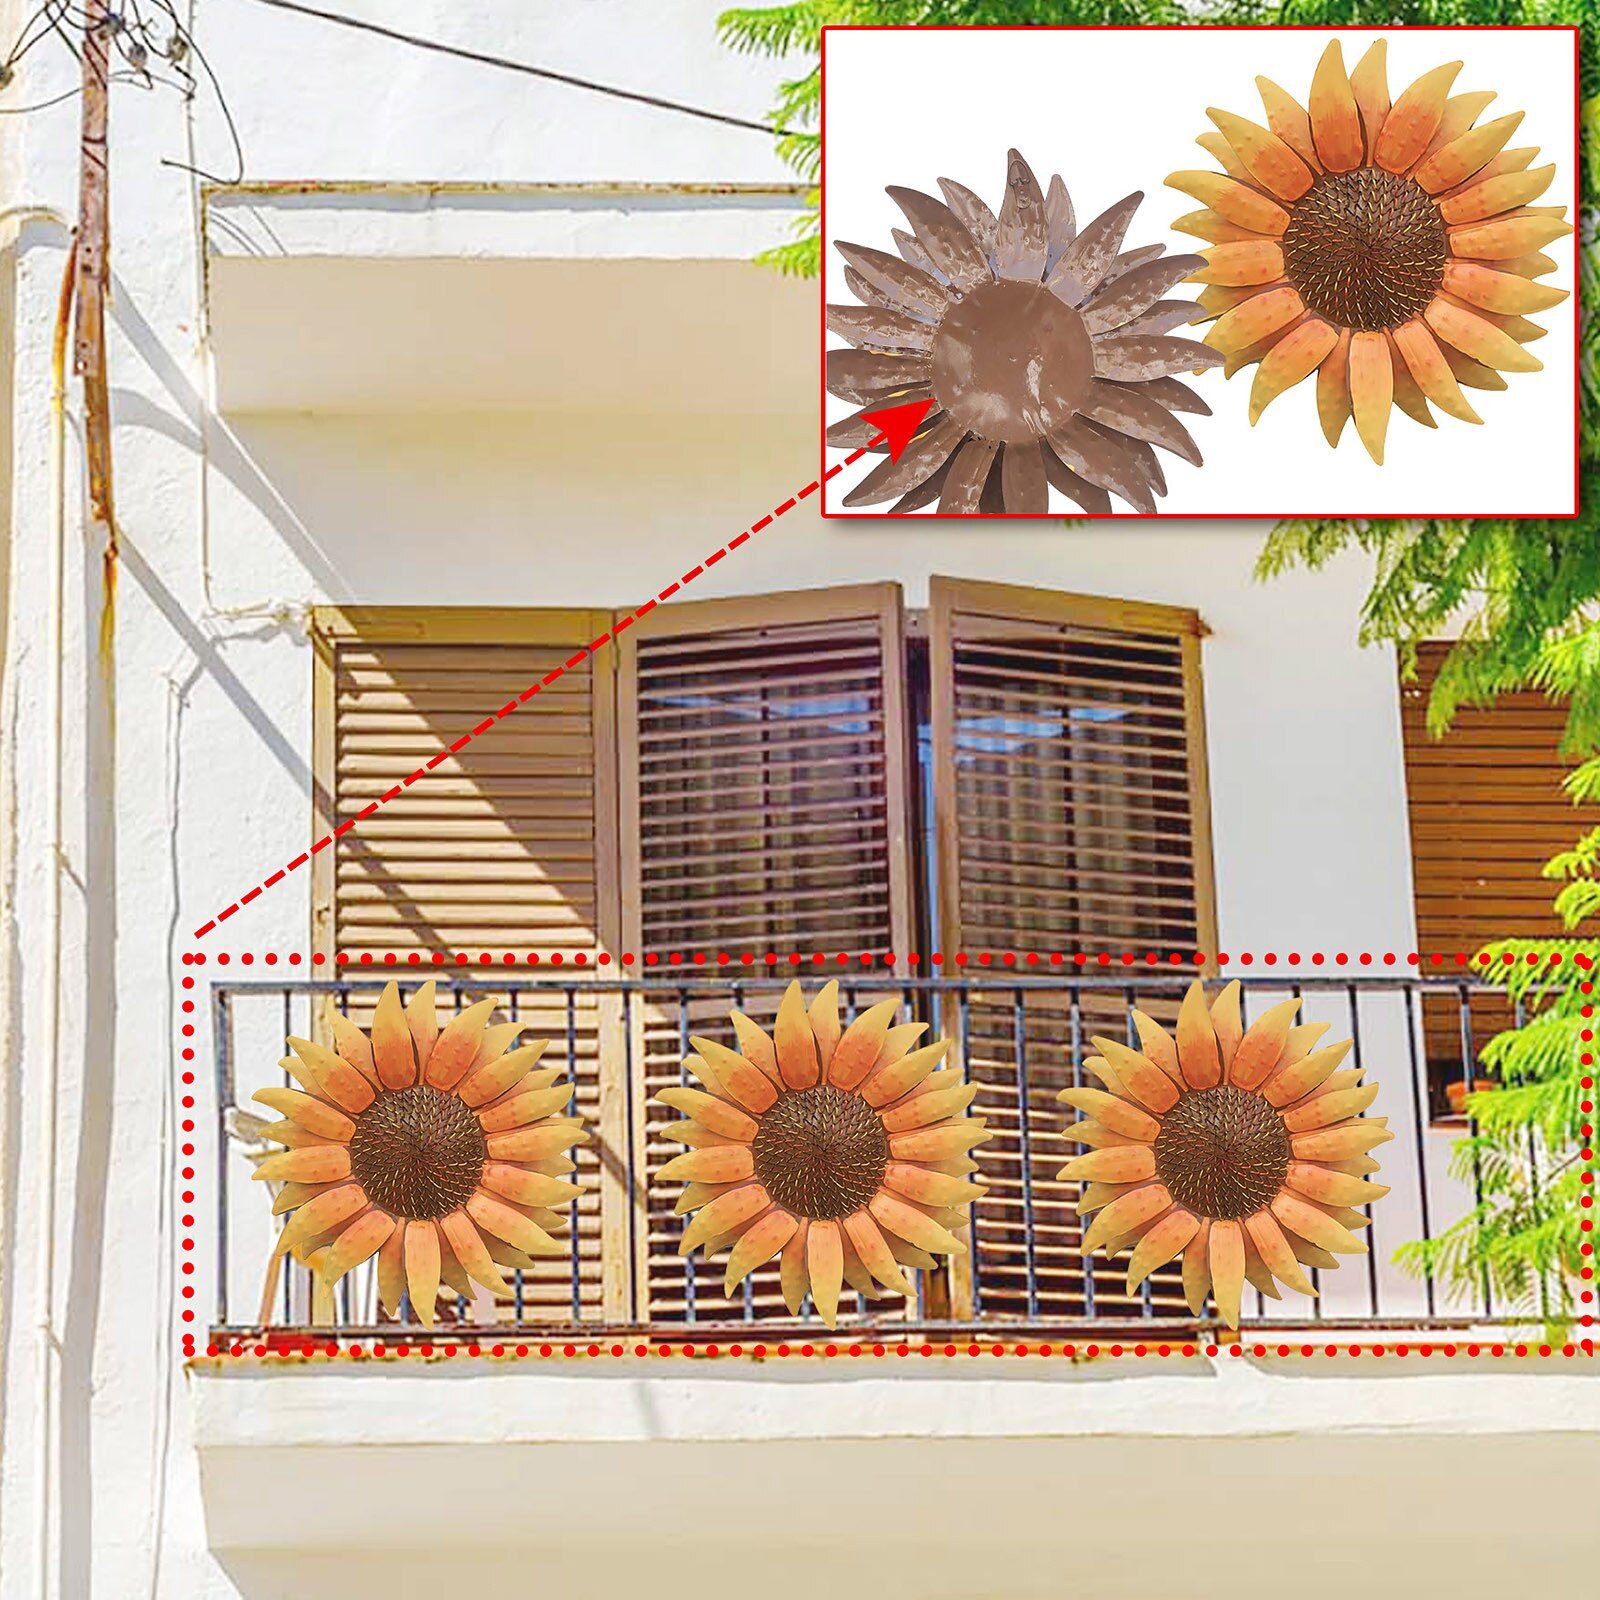 Sunflower Metal Flower Wall Sculptures Yellow Art Home Decoration For Bathroom  Bedroom Balcony Porch Patio Fence Garden Outdoor Within Recent Bathroom Bedroom Fence Wall Art (Gallery 17 of 20)